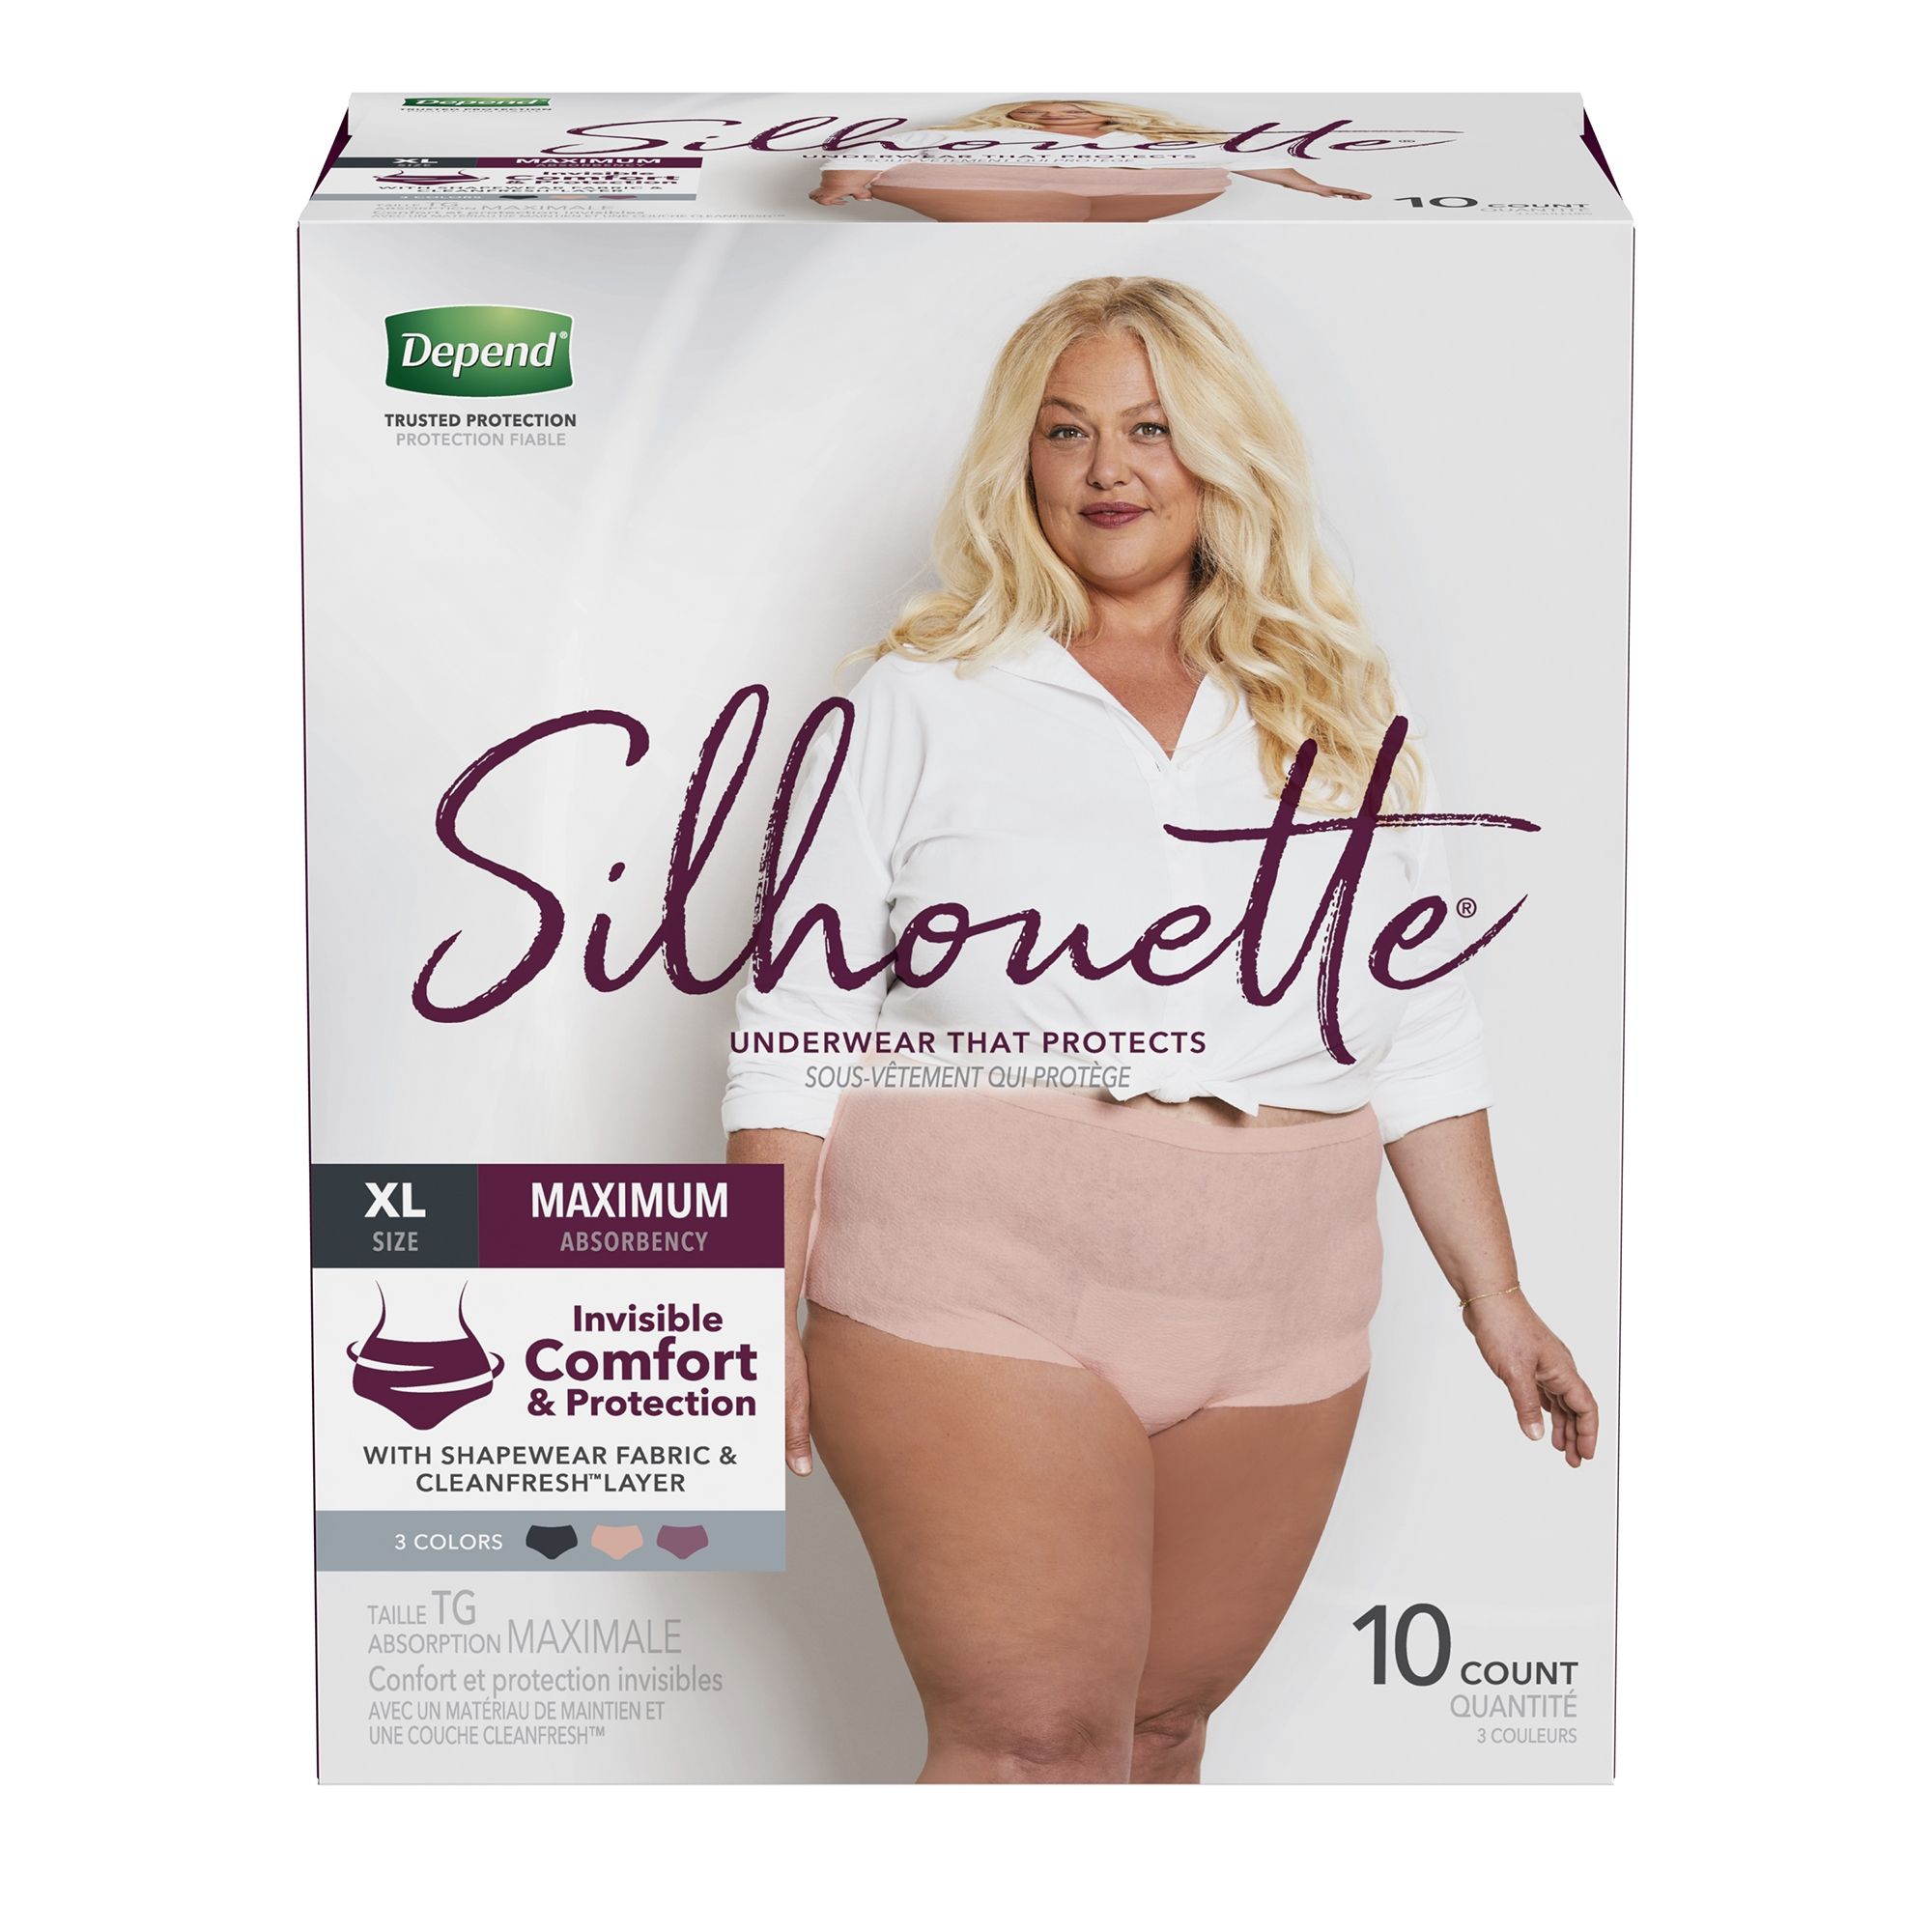 Fresh Protection Defense Women Incontinence Underwear Overnight, Blush -  Large, 14 units – Depend : Incontinence